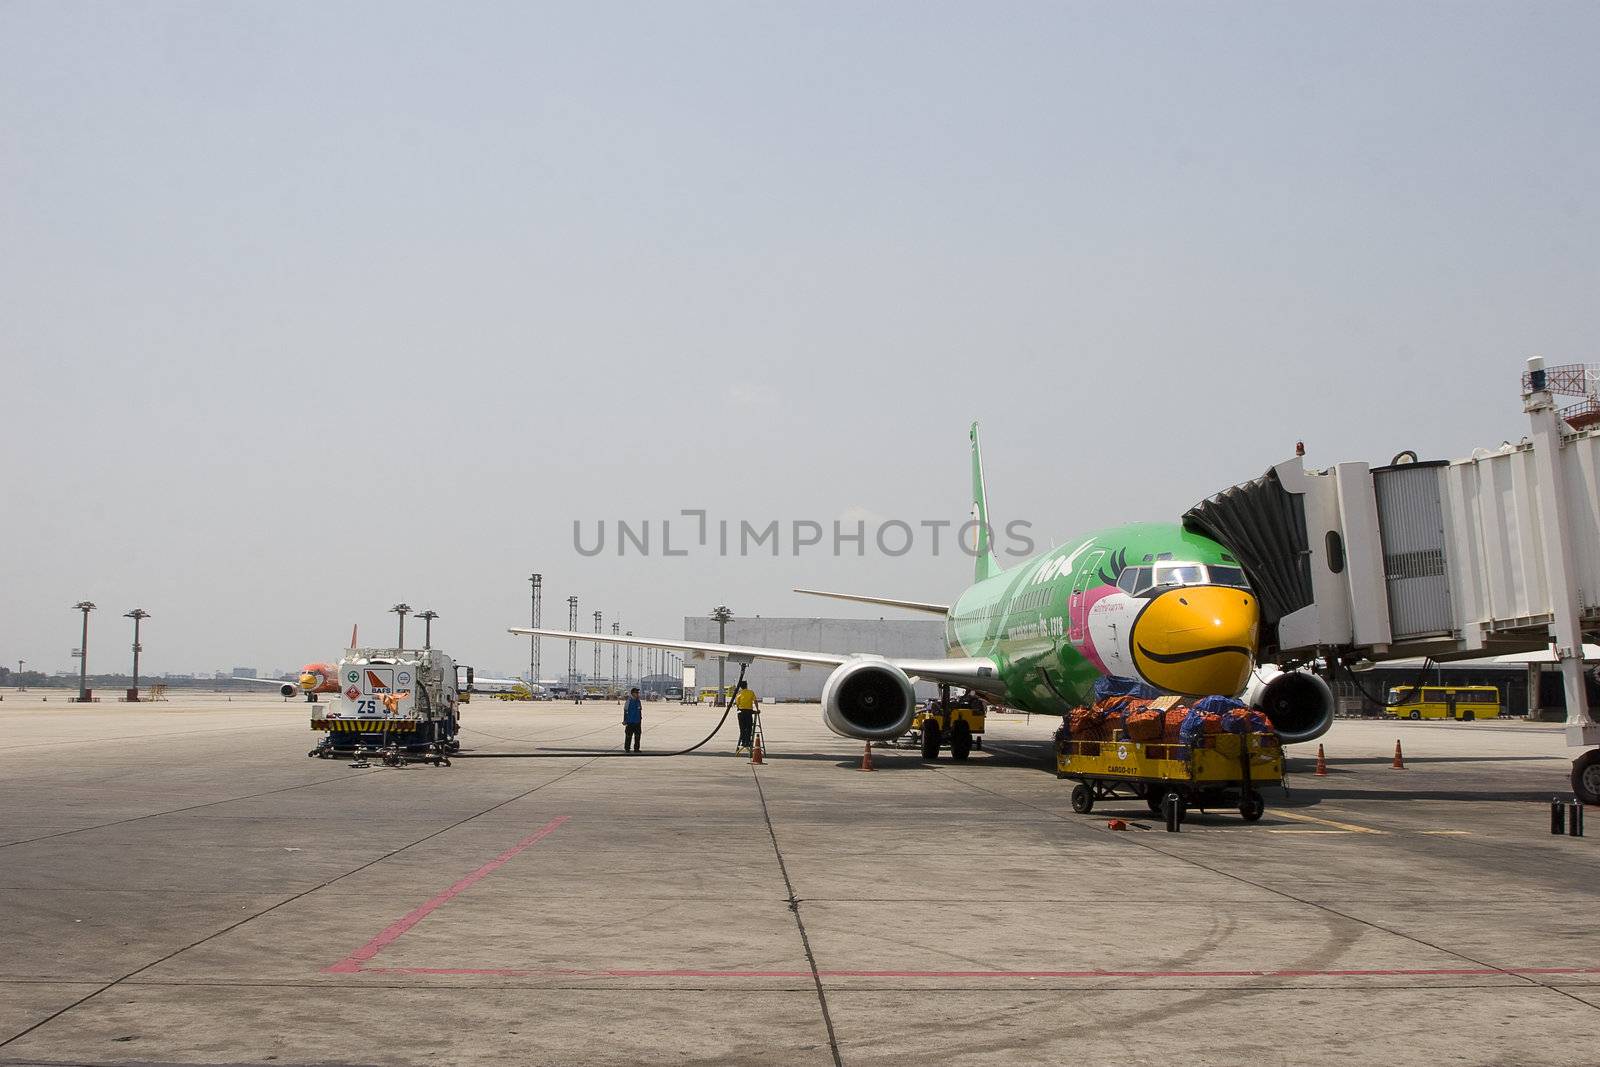 Nok Air. One of Thailand's budget airlines is parked for service and maintenance at Bangkok's domestic airport.